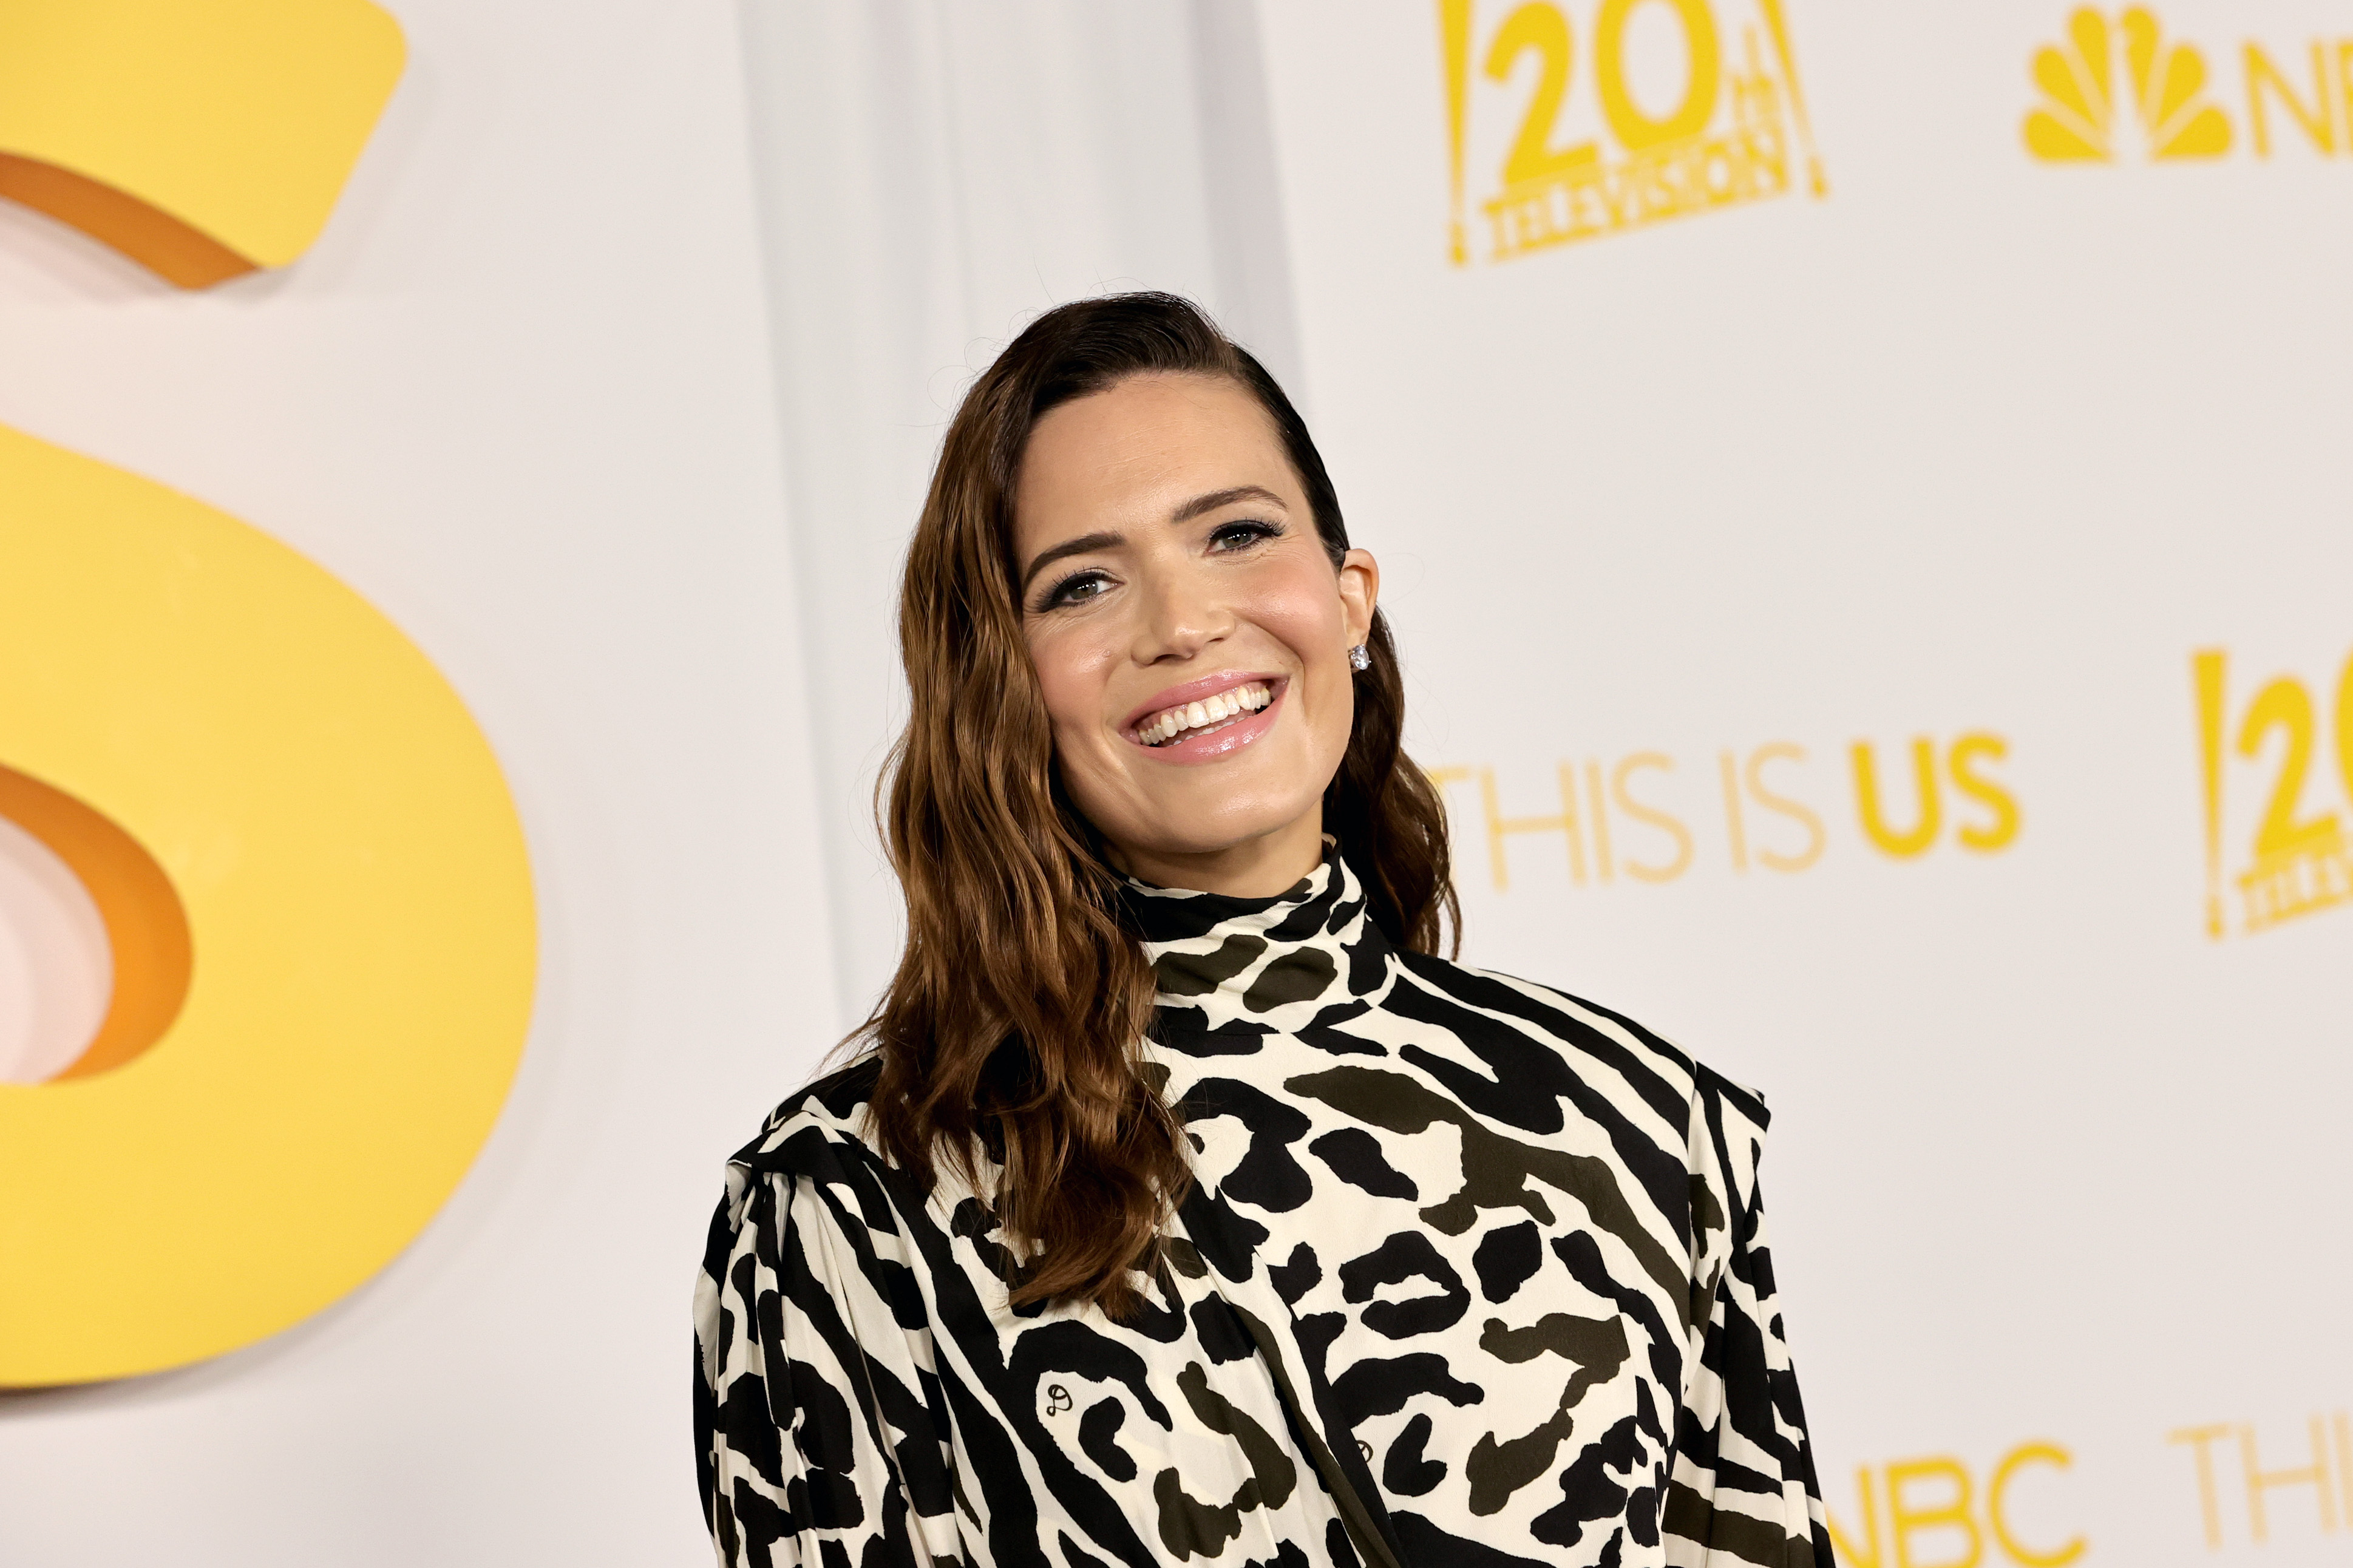 Mandy Moore, the director of 'This Is Us' Season 6 Episode 9, wears a black and white long-sleeved animal print turtleneck dress.